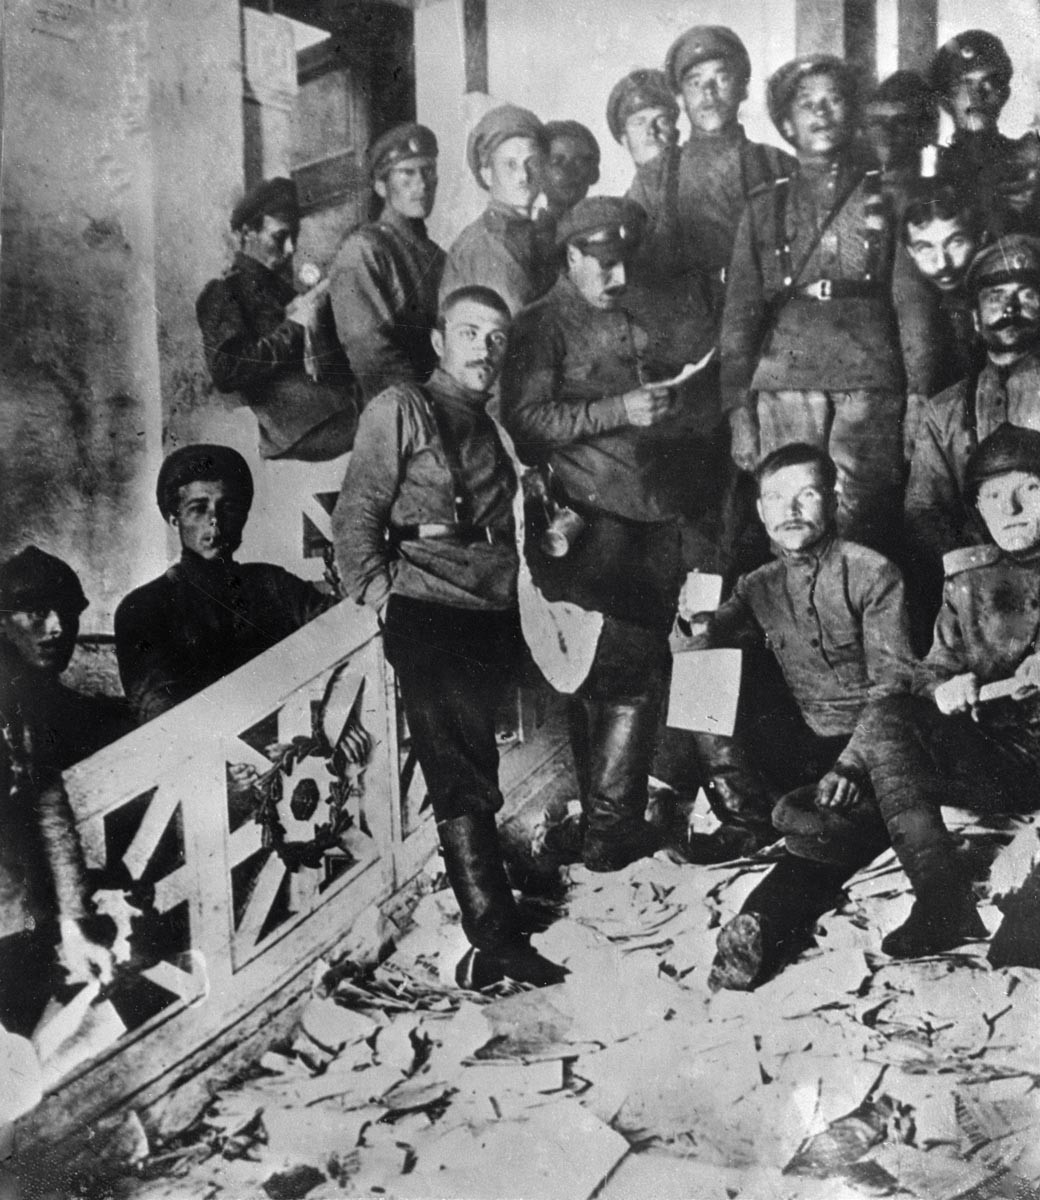 The revolting cadets inside the ravaged premises of the Central Committee in the former Kshesinskaya Palace. June 6, 1917.